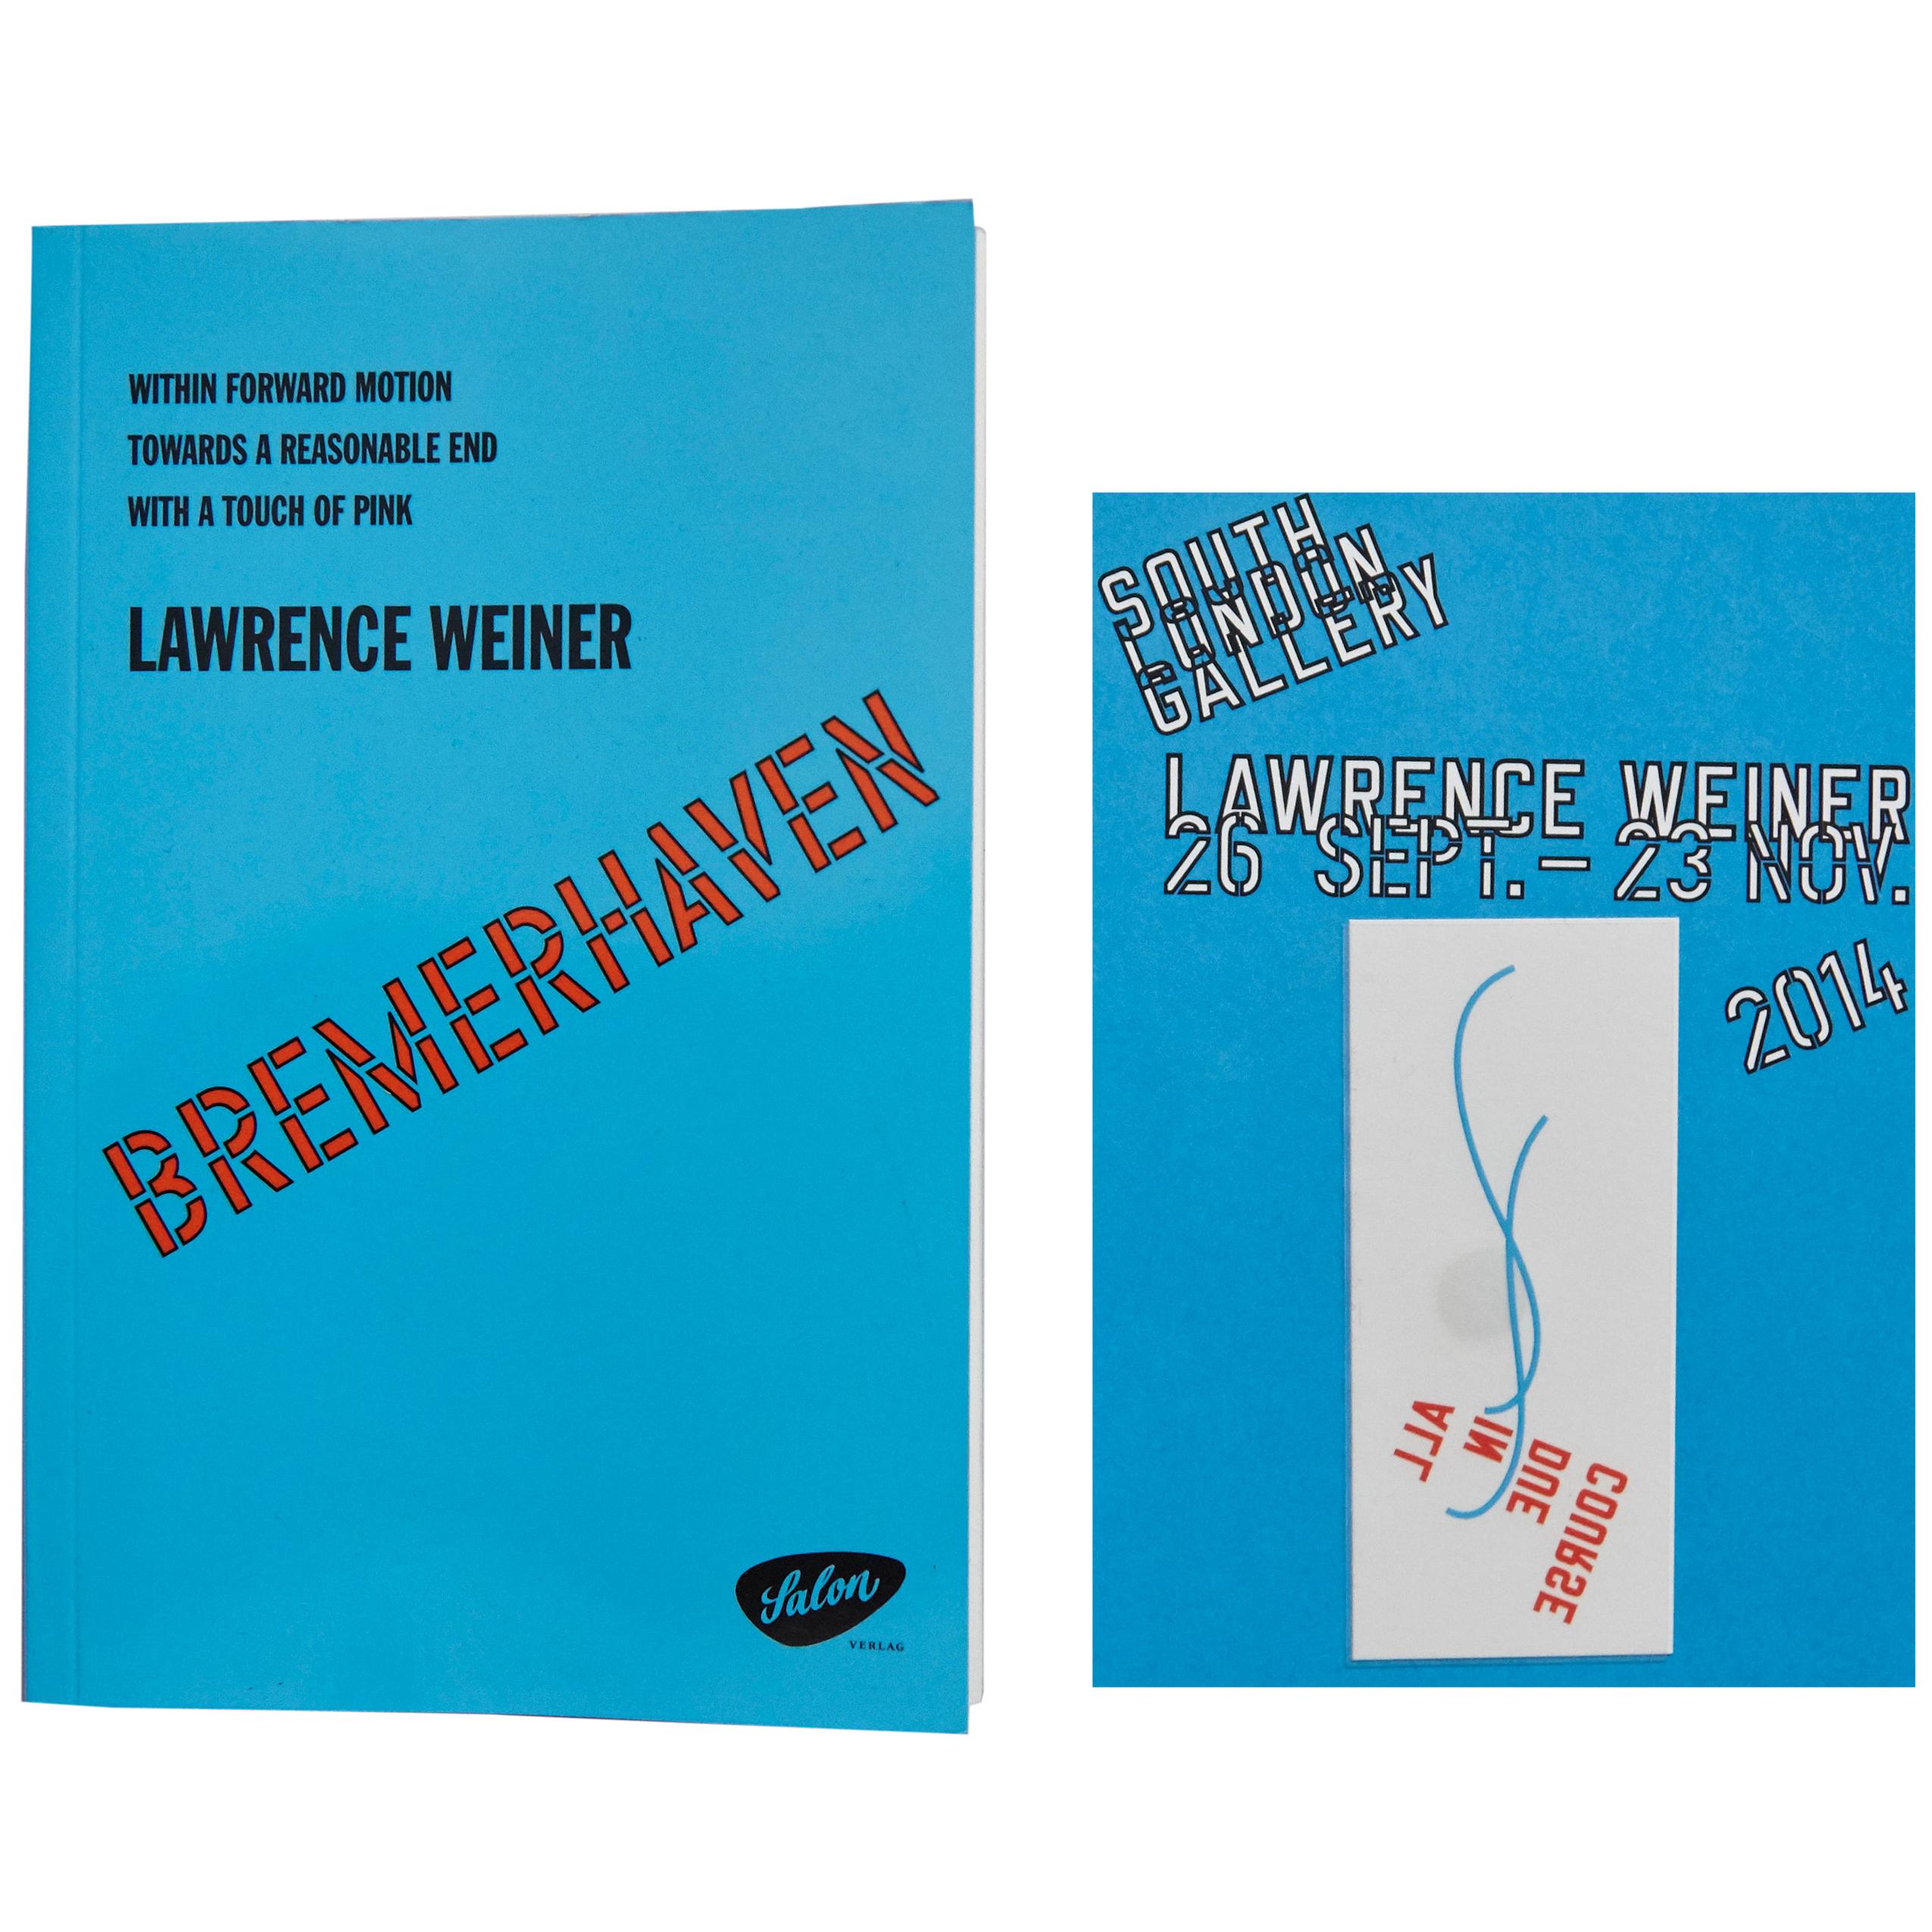 Lawrence Weiner Limited Edition Book and Tattoo, South London Gallery, 2014